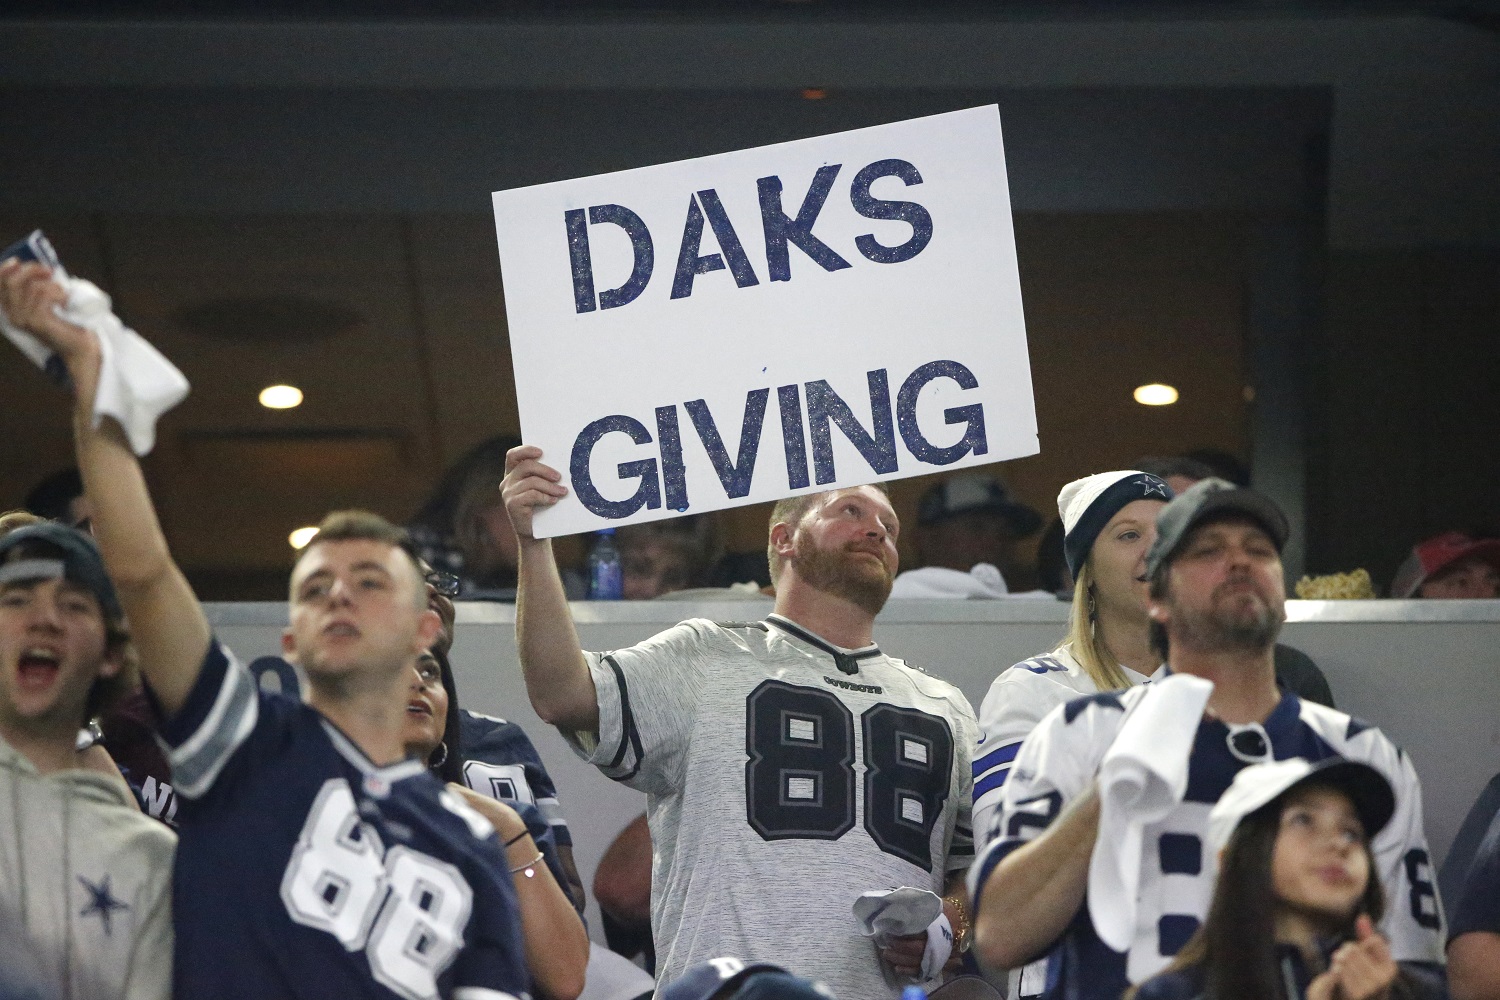 A Dallas Cowboys fan holds up a sign referring to quarterback Dak Prescott and the Thanksgiving holiday during an NFL football game against the Washington Redskins on Thursday, Nov. 24, 2016, in Arlington, Texas. (AP Photo/Ron Jenkins)